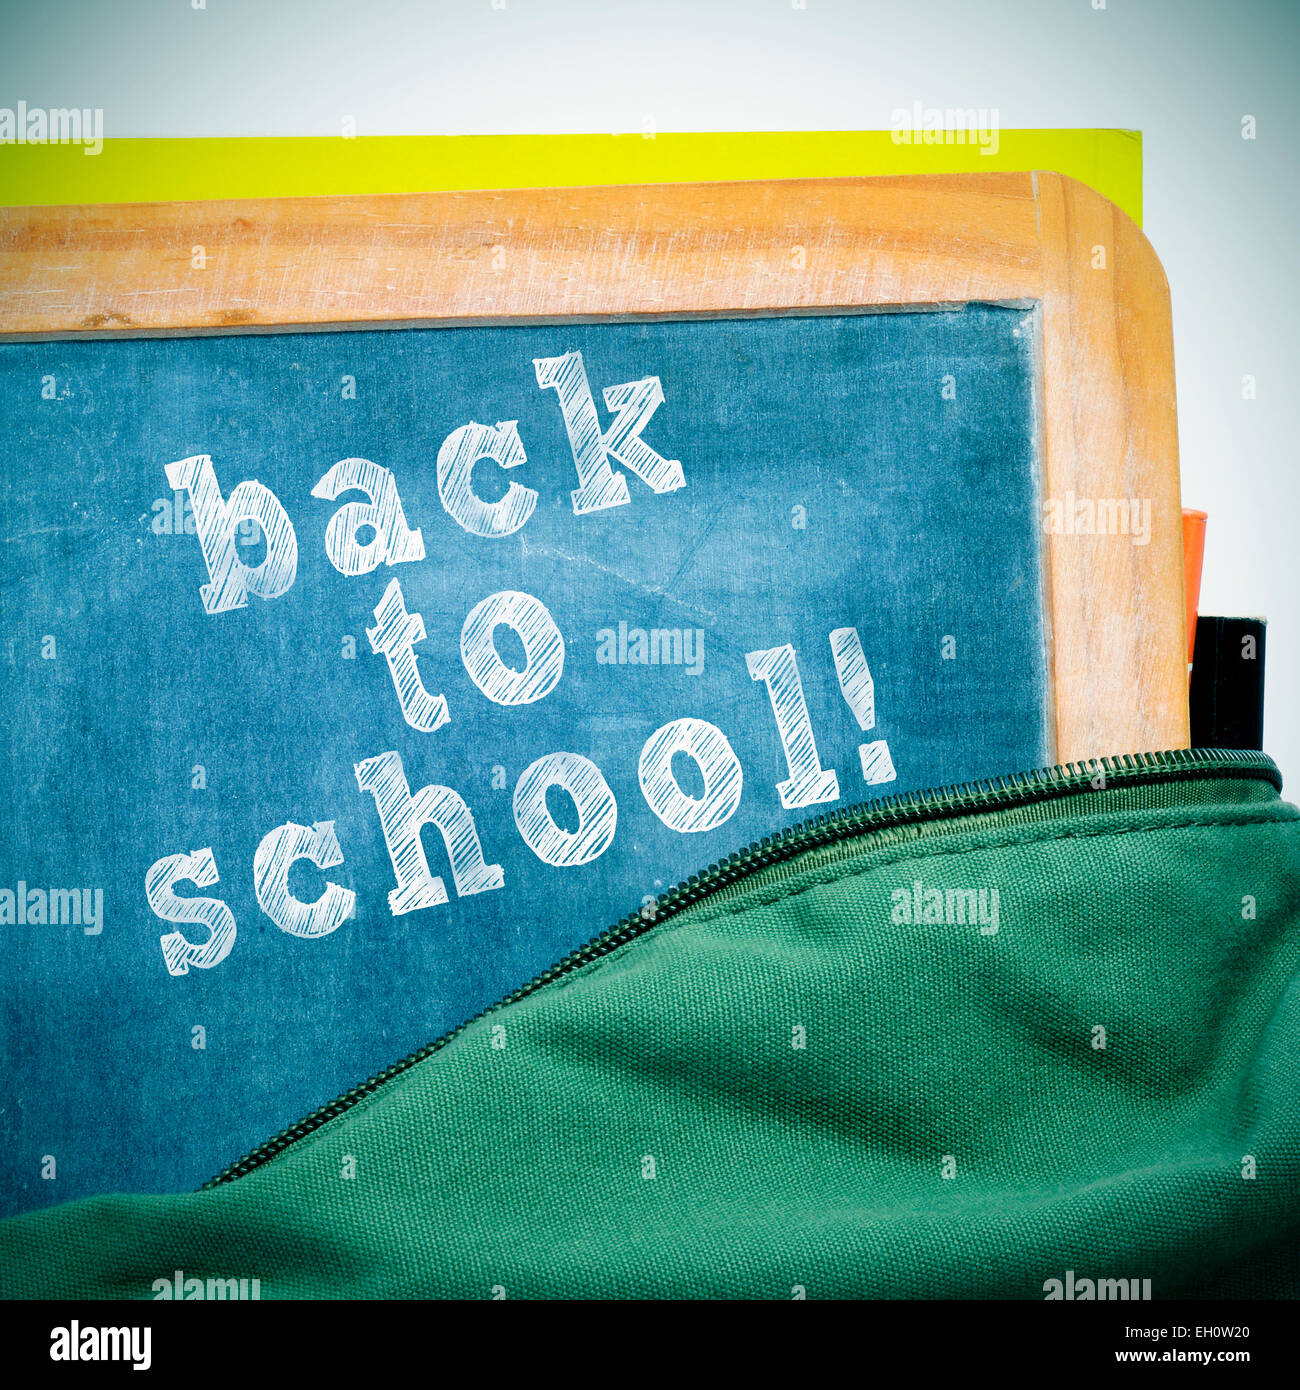 sentence back to school written in a blackboard with a wooden frame, in a schoolbag, with a retro effect Stock Photo